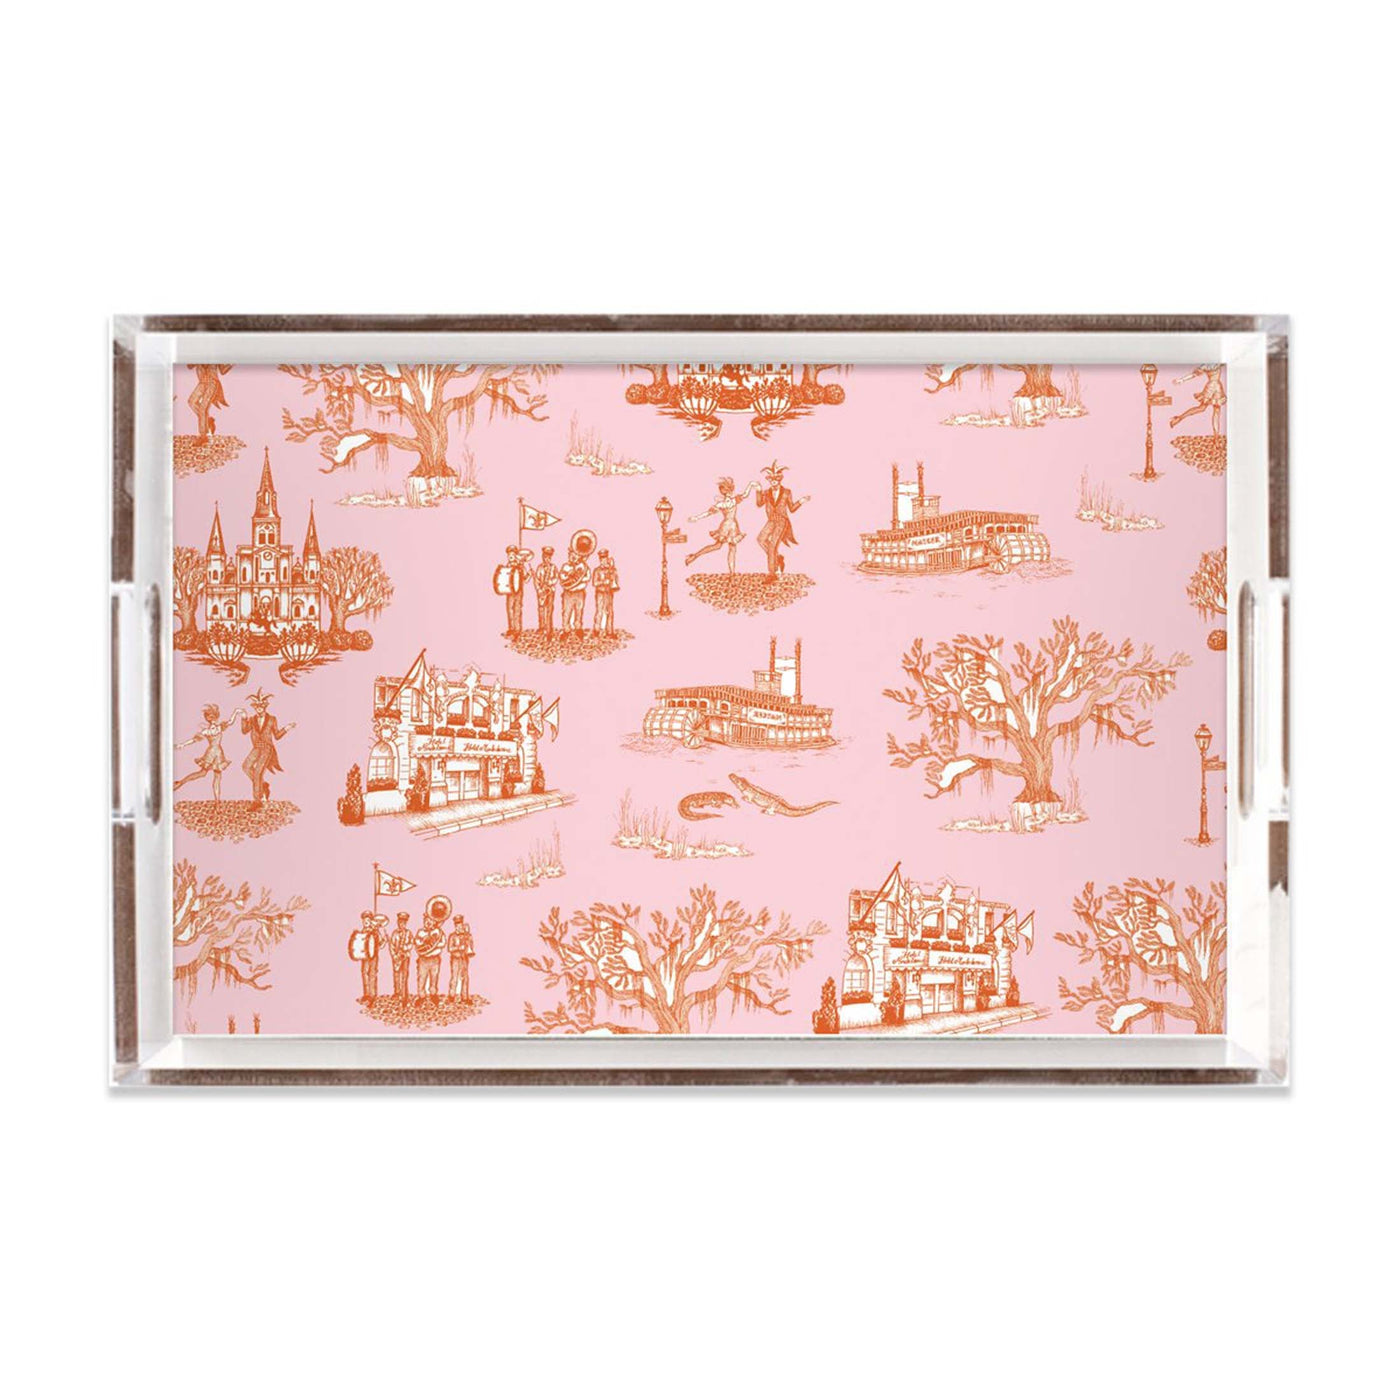 New Orleans Toile Lucite Tray Lucite Trays Orange Pink / 11x17 Katie Kime